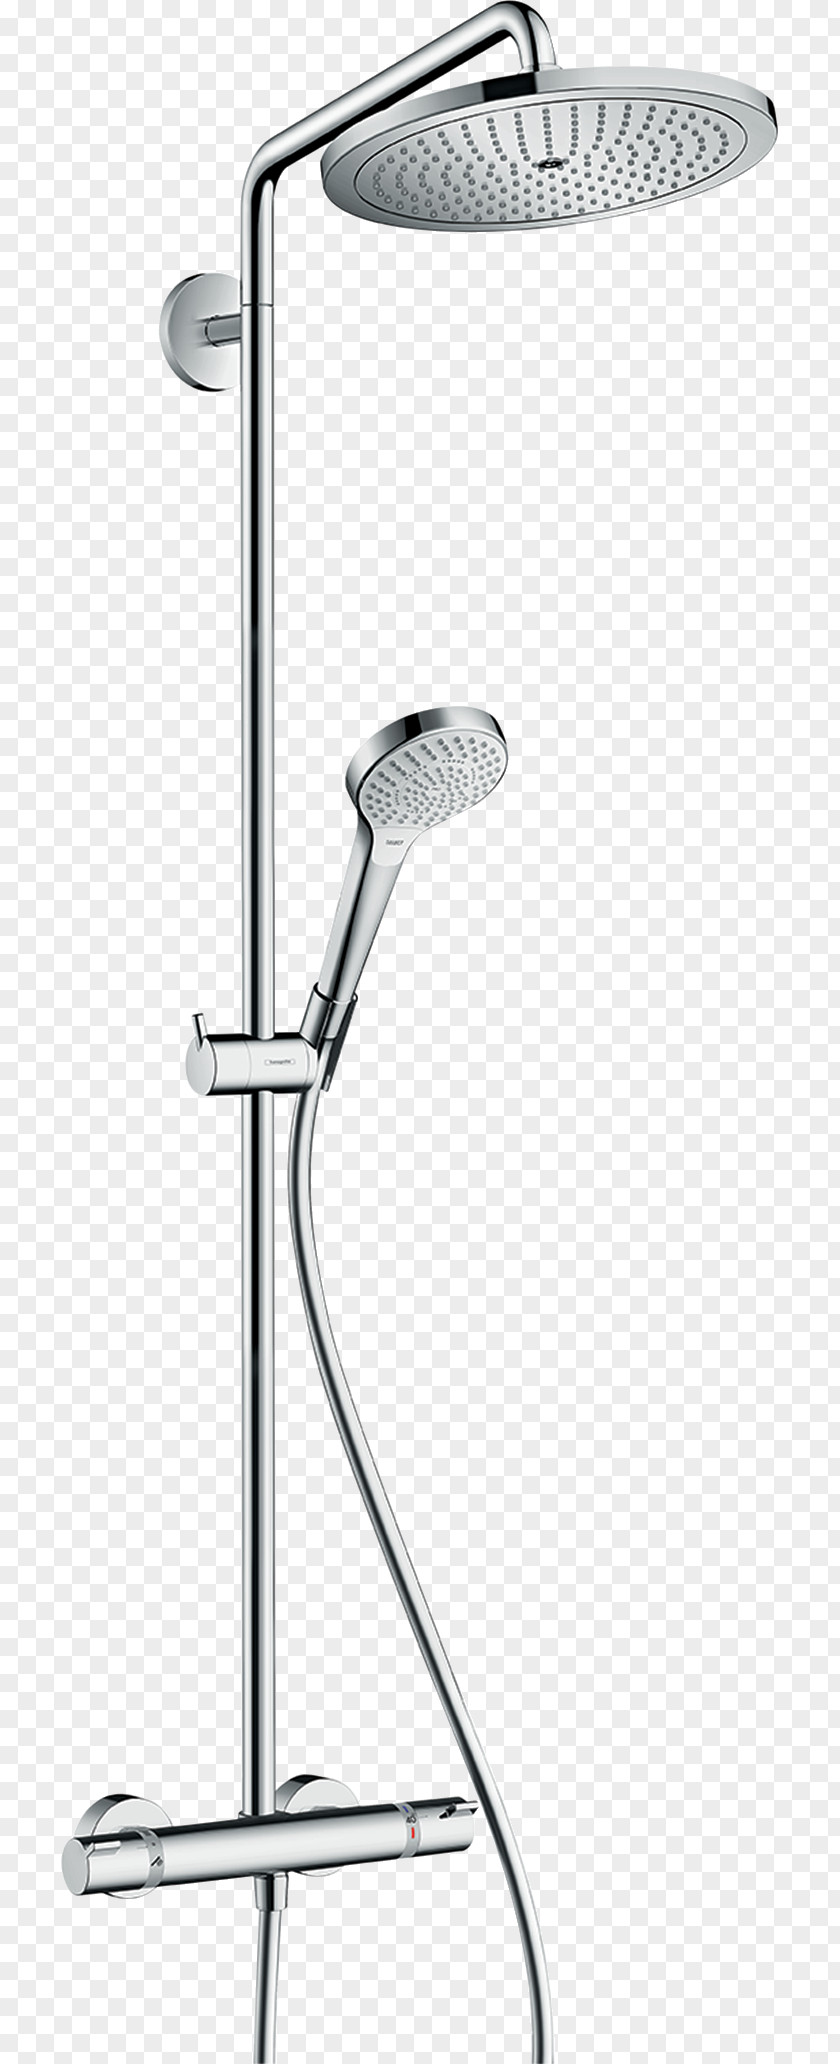 Shower Hansgrohe Thermostatic Mixing Valve PNG